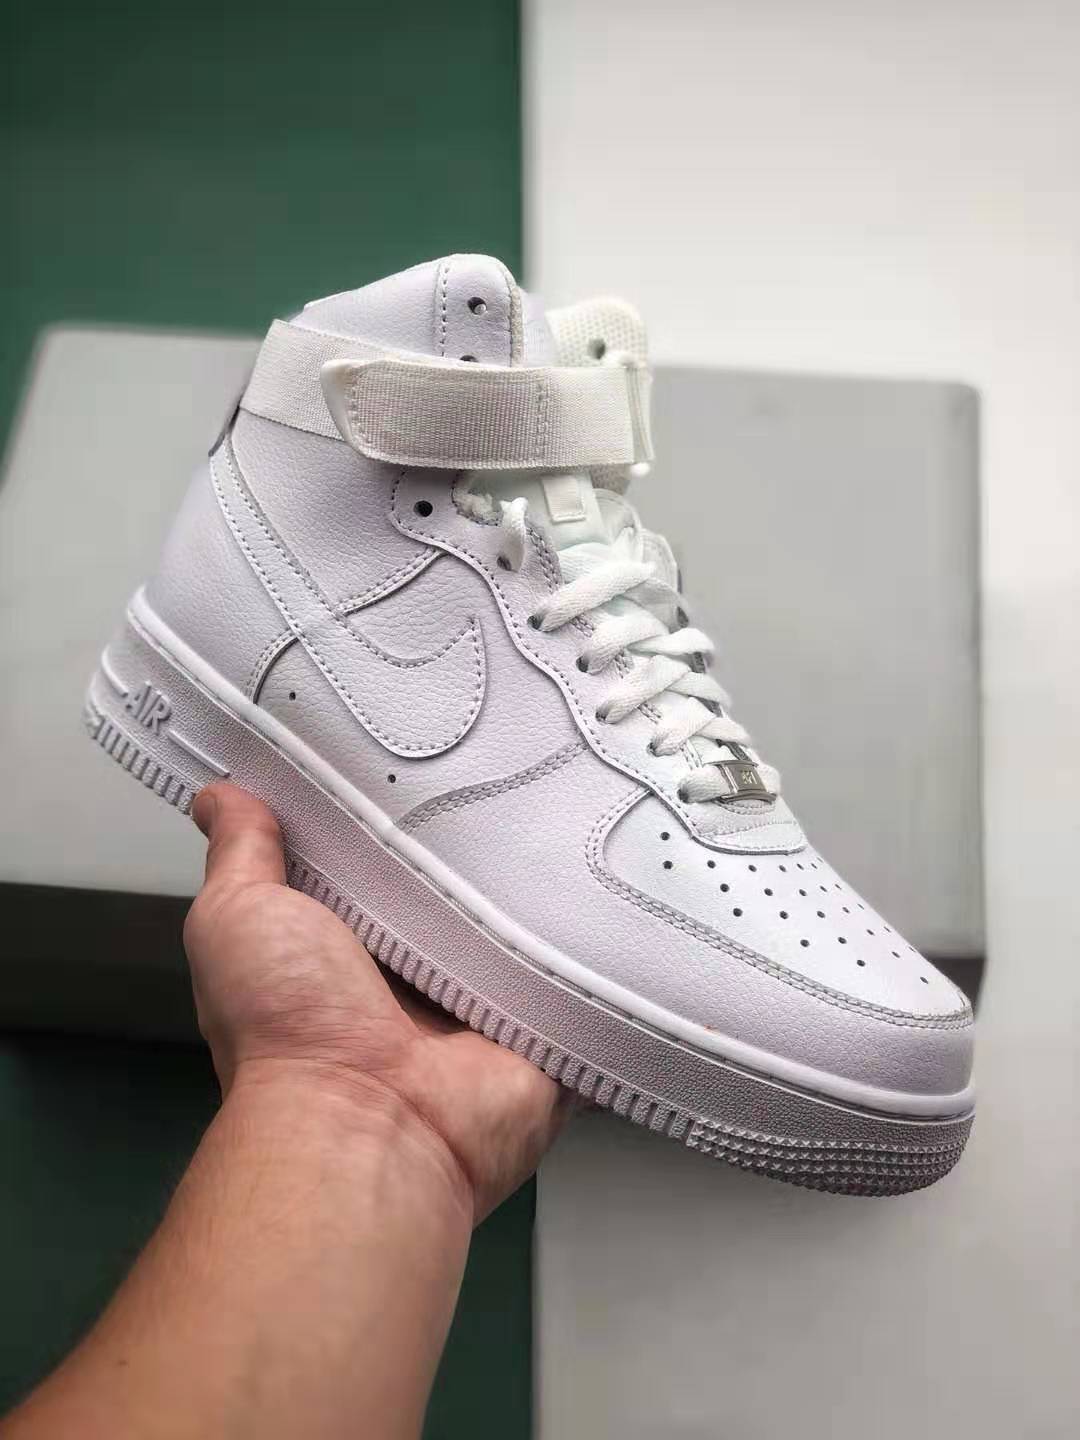 Nike Air Force 1 High '07 'White' 315121-115 - Iconic Style for Men & Women